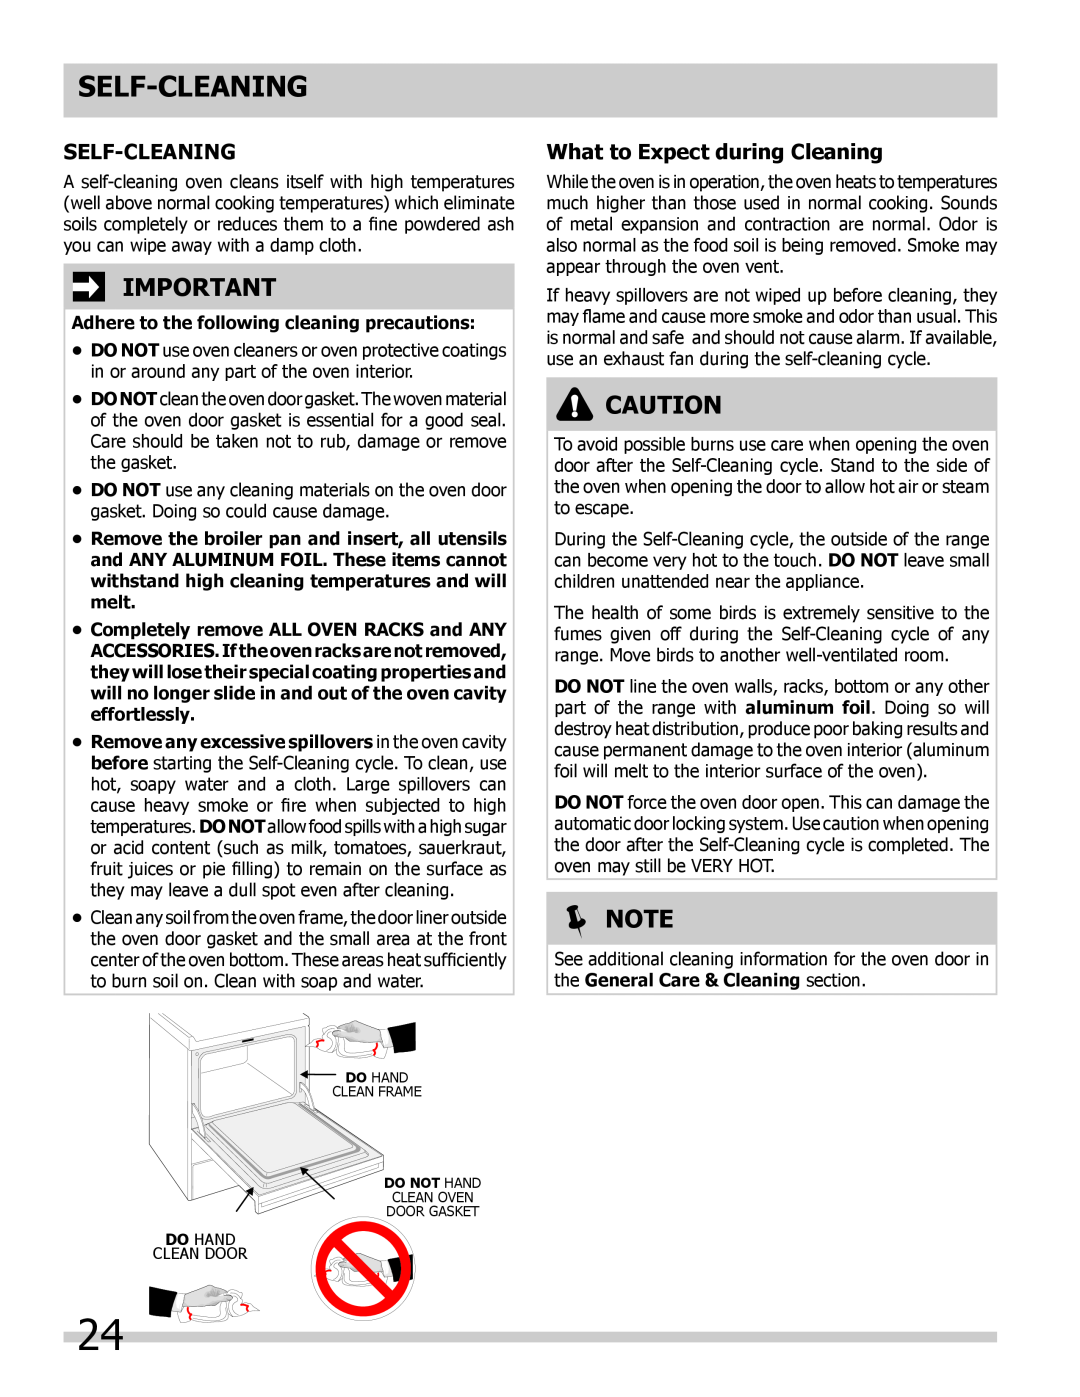 Frigidaire FGET2765KF Self-Cleaning, What to Expect during Cleaning, Adhere to the following cleaning precautions,  Note 